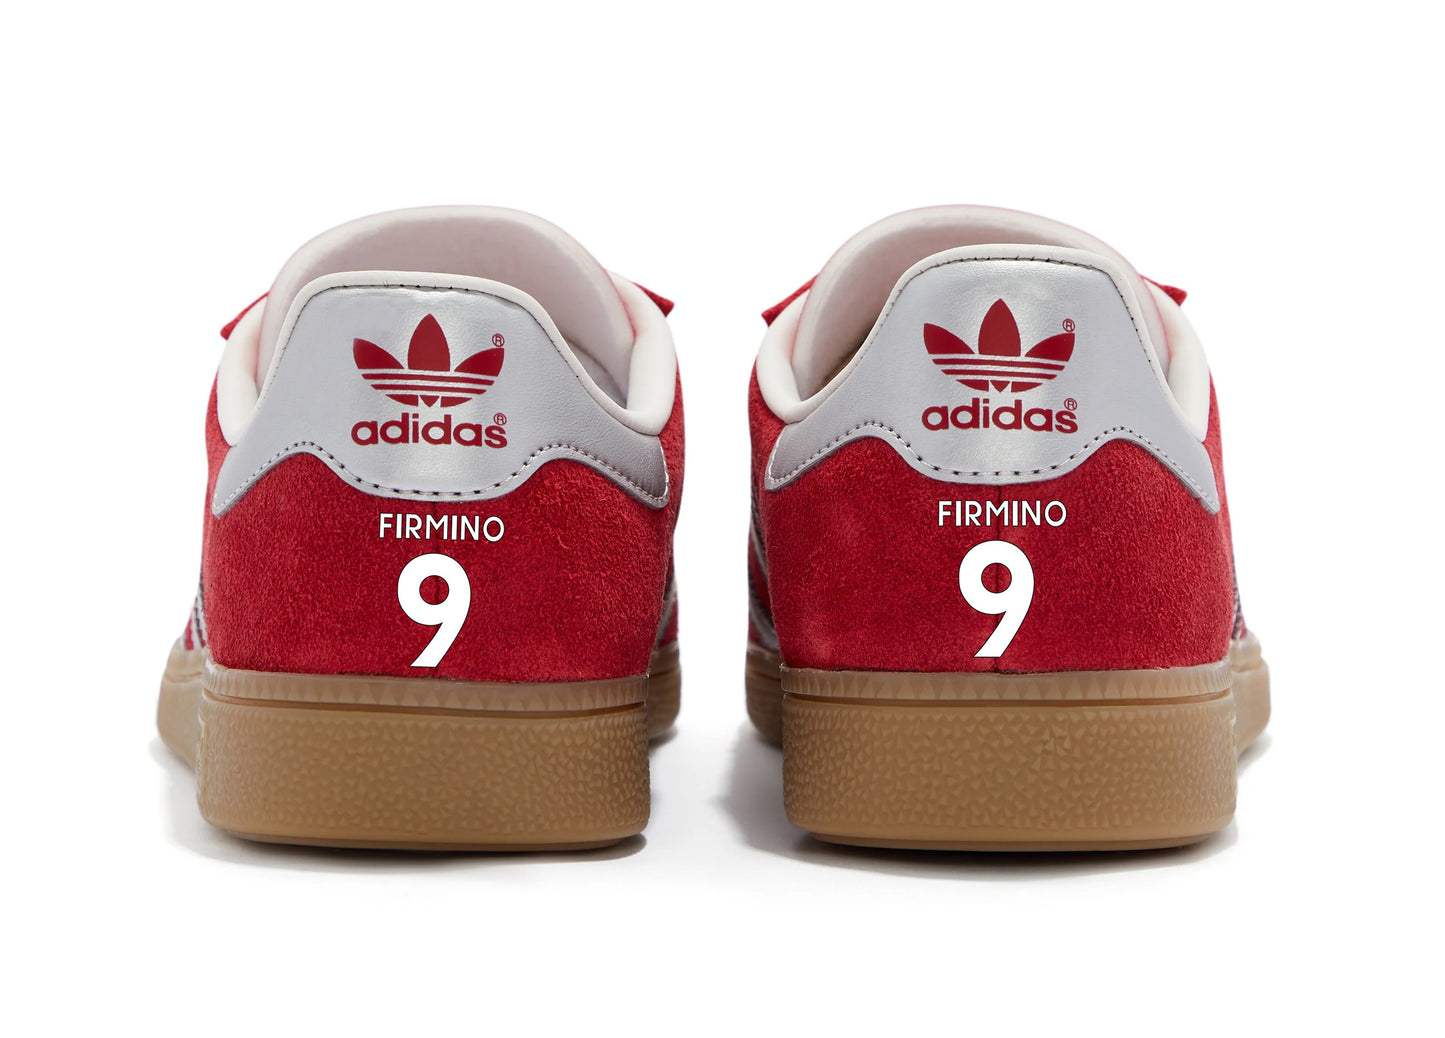 Limited edition Liverpool FC Roberto Firmino inspired red / white Adidas custom Munchen trainers / sneakers